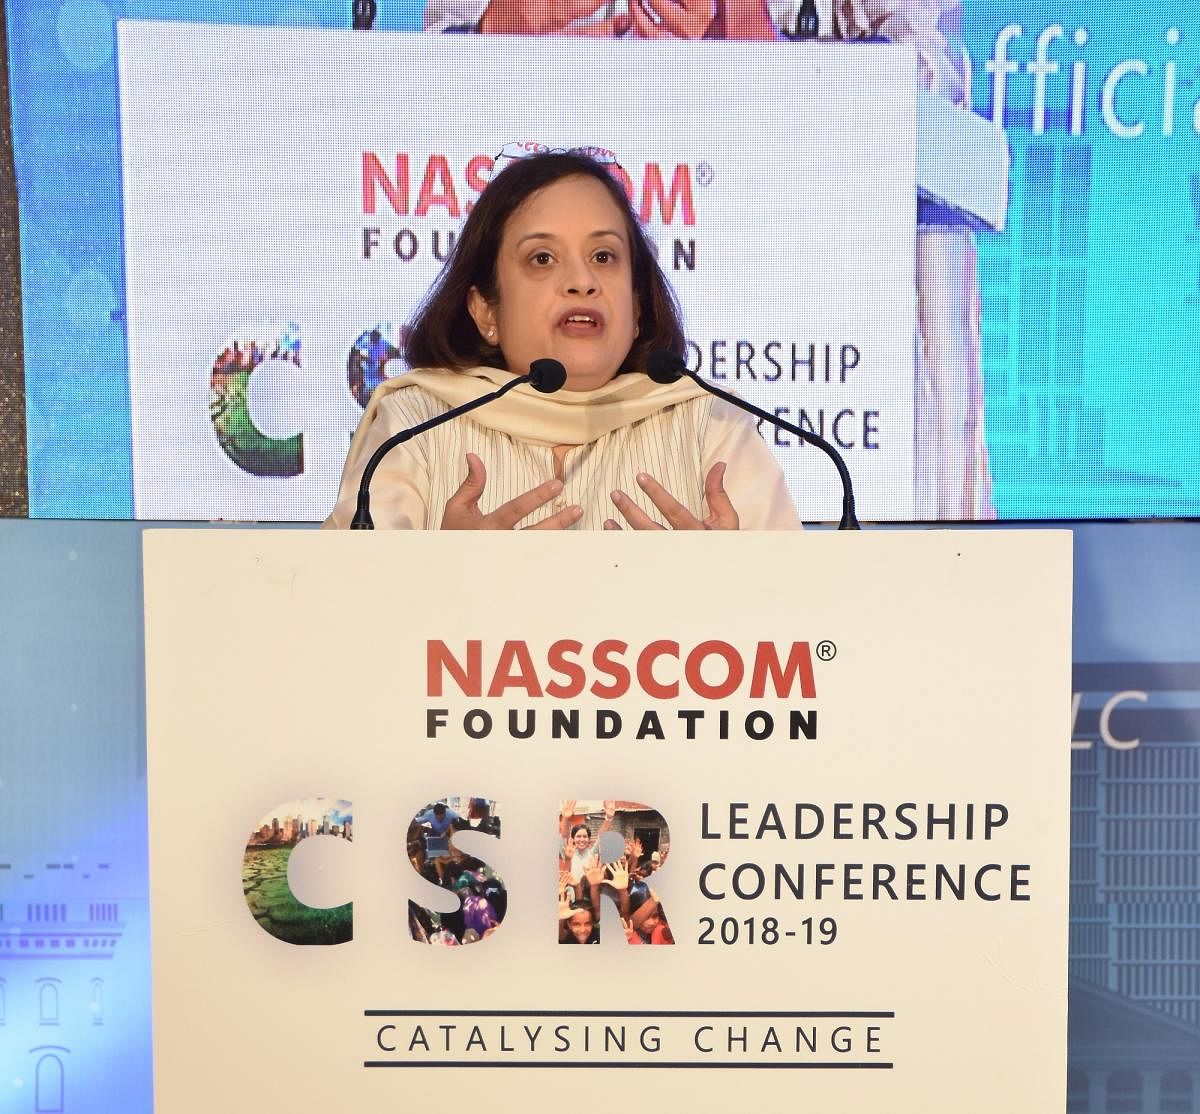 India has potential to be magnet for digital innovation: Nasscom president